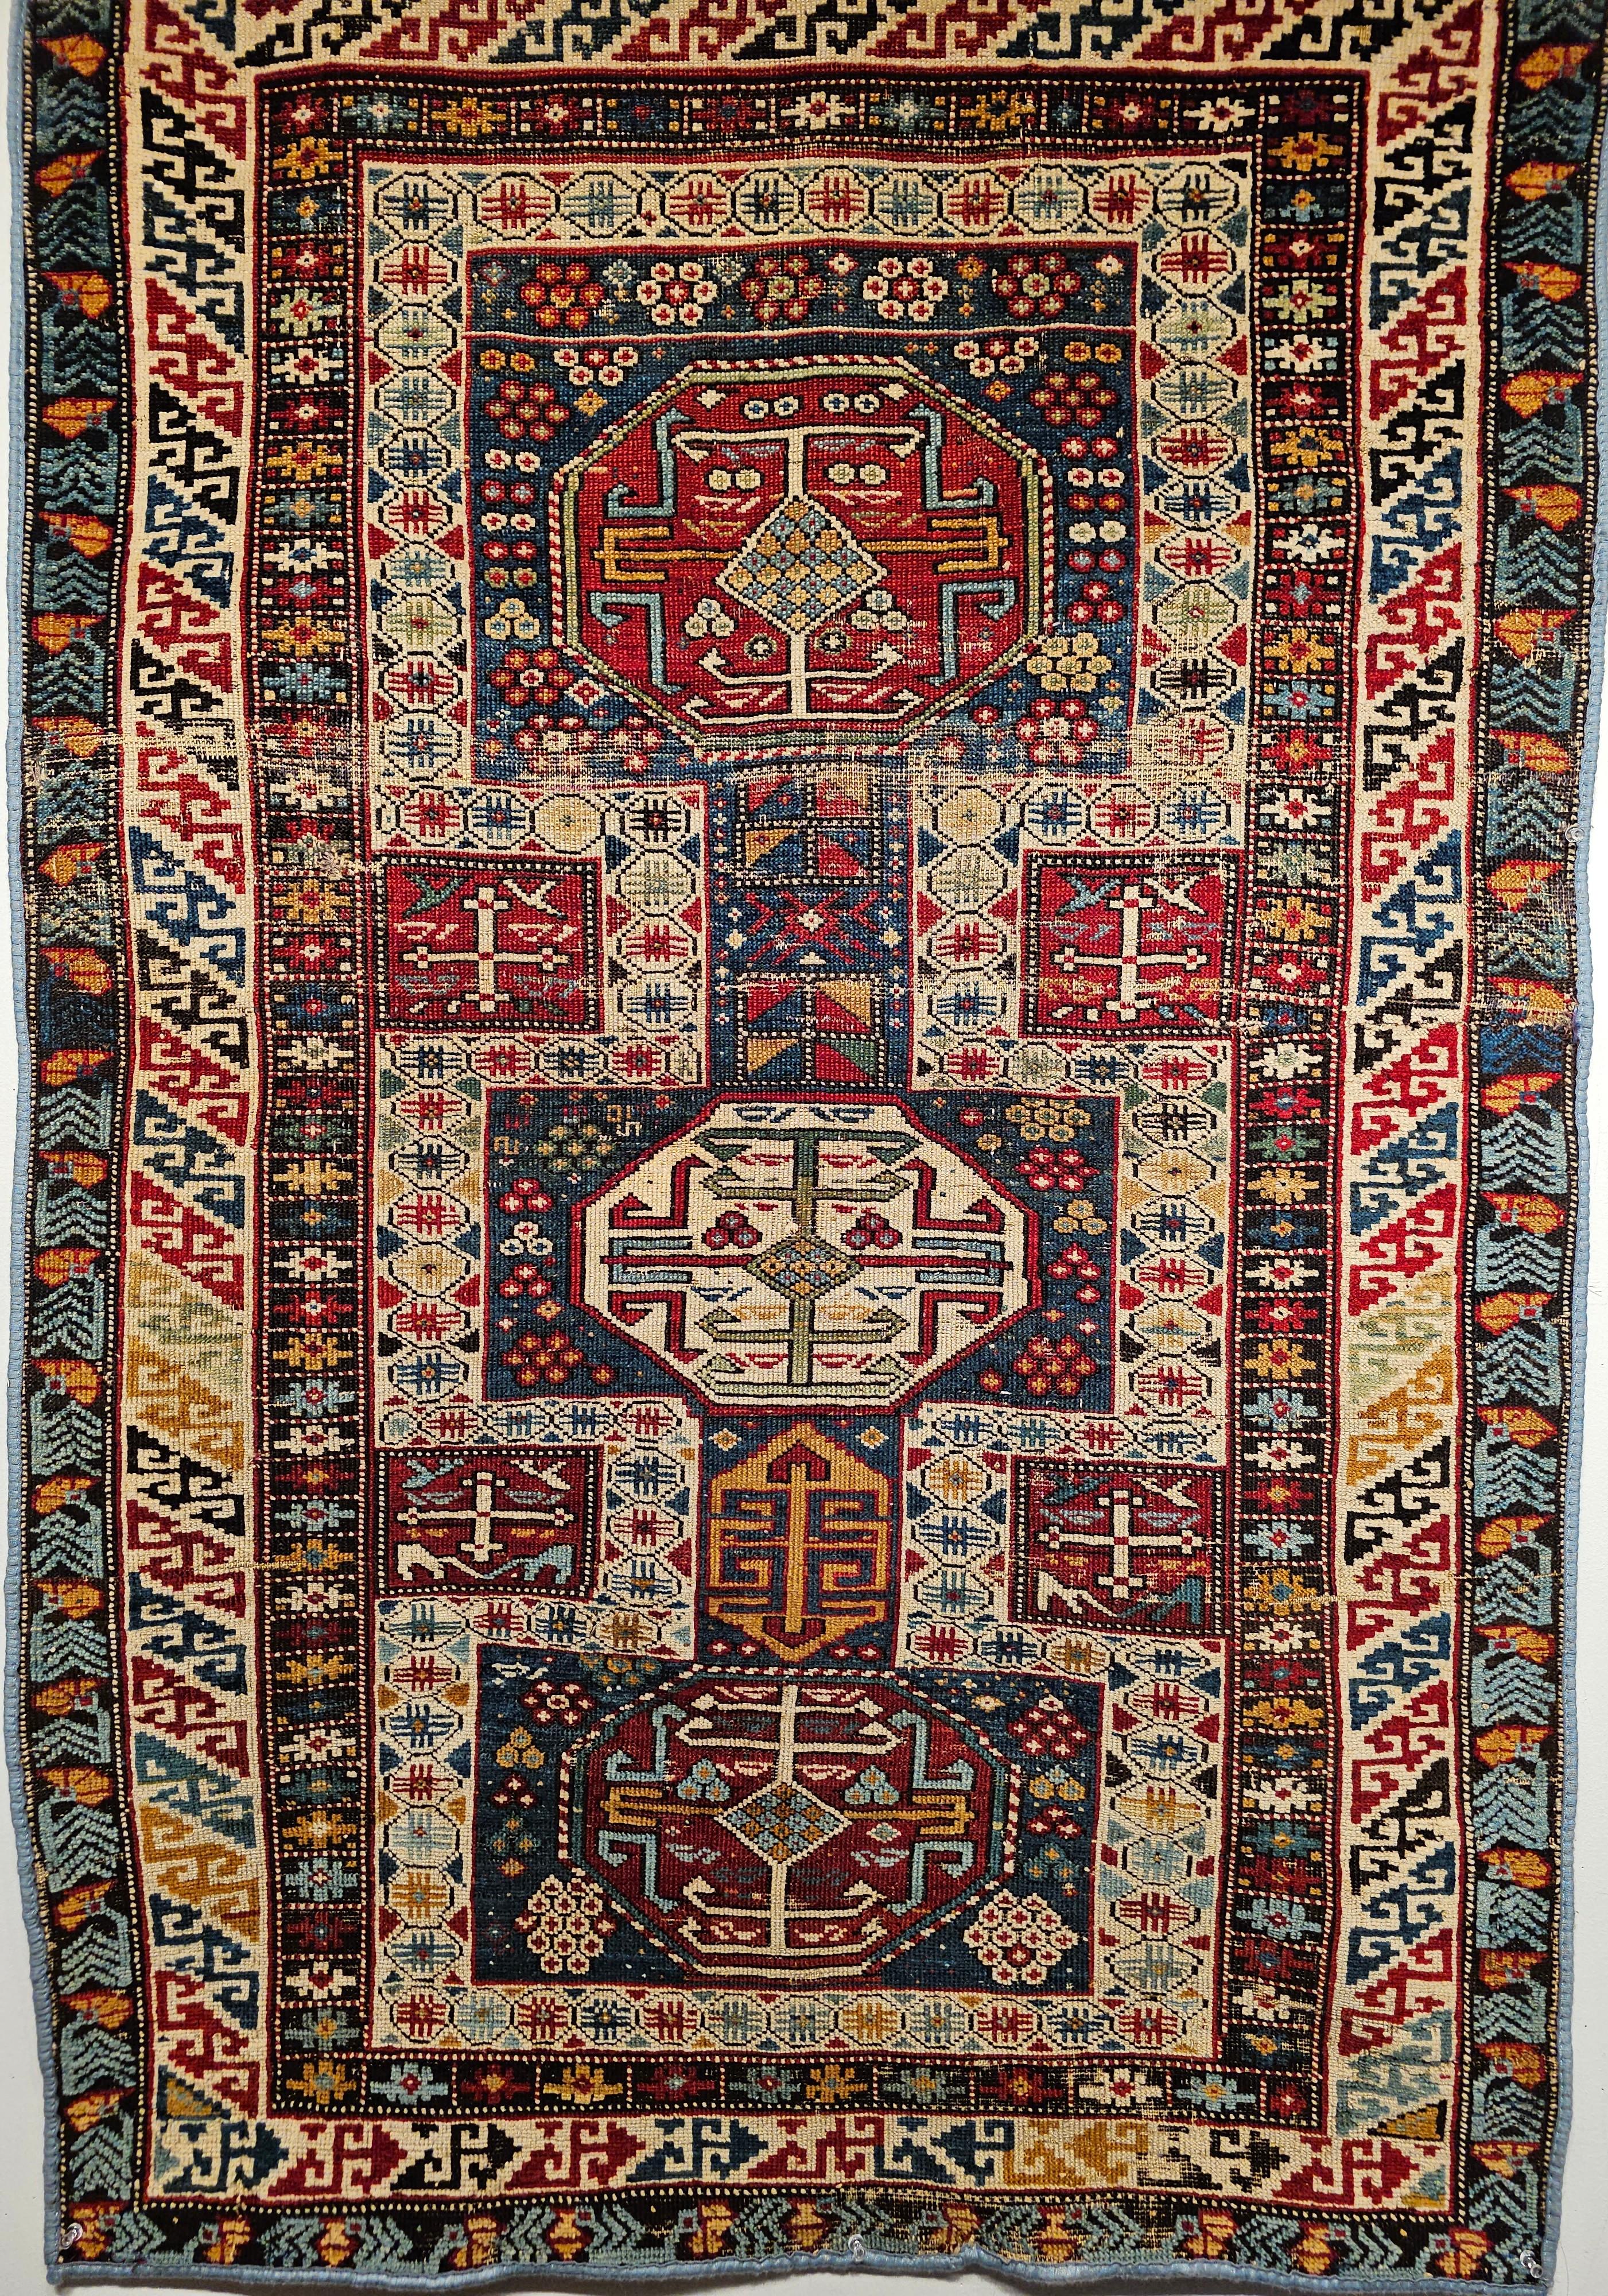 We love the fantastic design and color pattern in this early 1900s Caucasian Kuba area rug in French blue, red, yellow.  Kuba is a village located in the southeast area of Azerbaijan in the Caucasus.  The Kuba rug is in a triple medallion design in